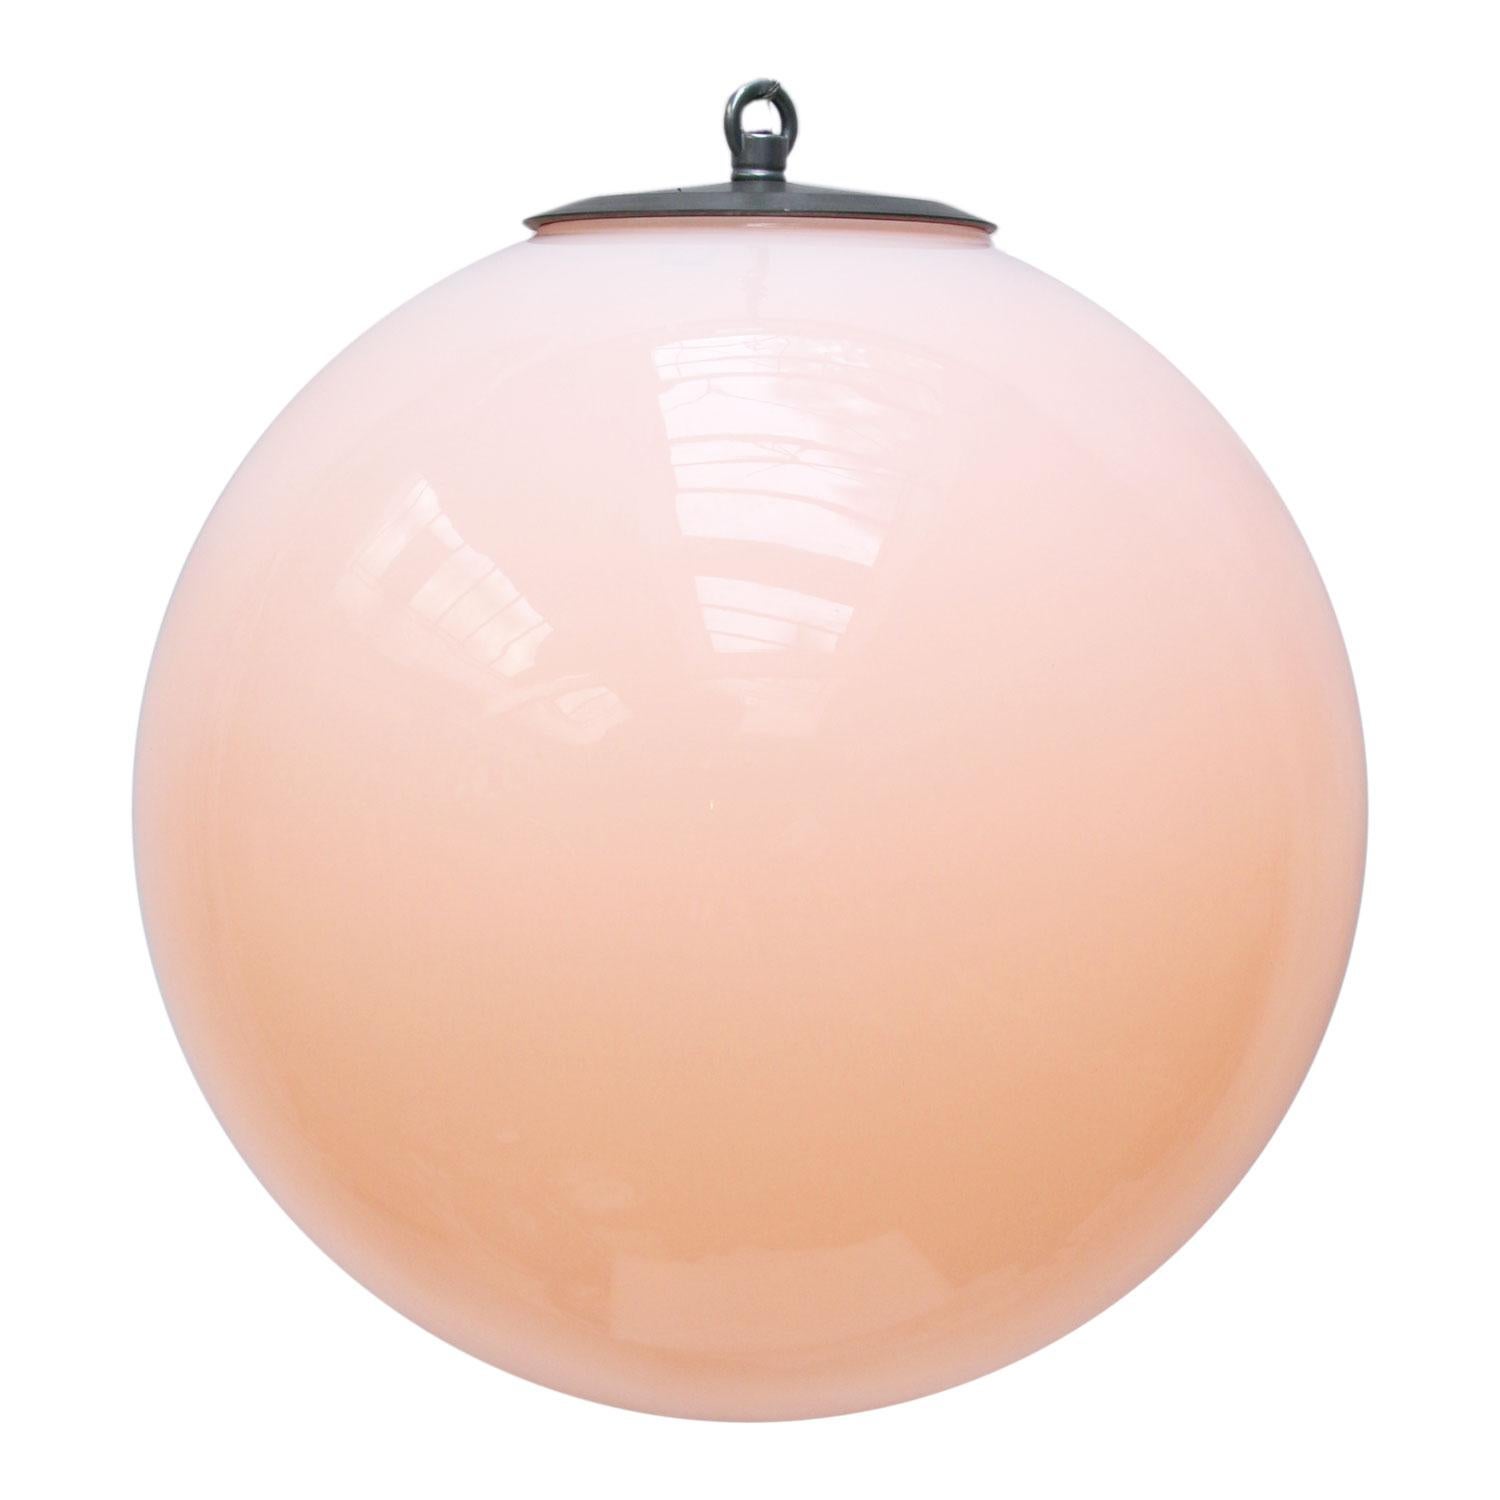 Opaline glass pendant.

Weight: 3.00 kg / 6.6 lb

Priced per individual item. All lamps have been made suitable by international standards for incandescent light bulbs, energy-efficient and LED bulbs. E26/E27 bulb holders and new wiring are CE